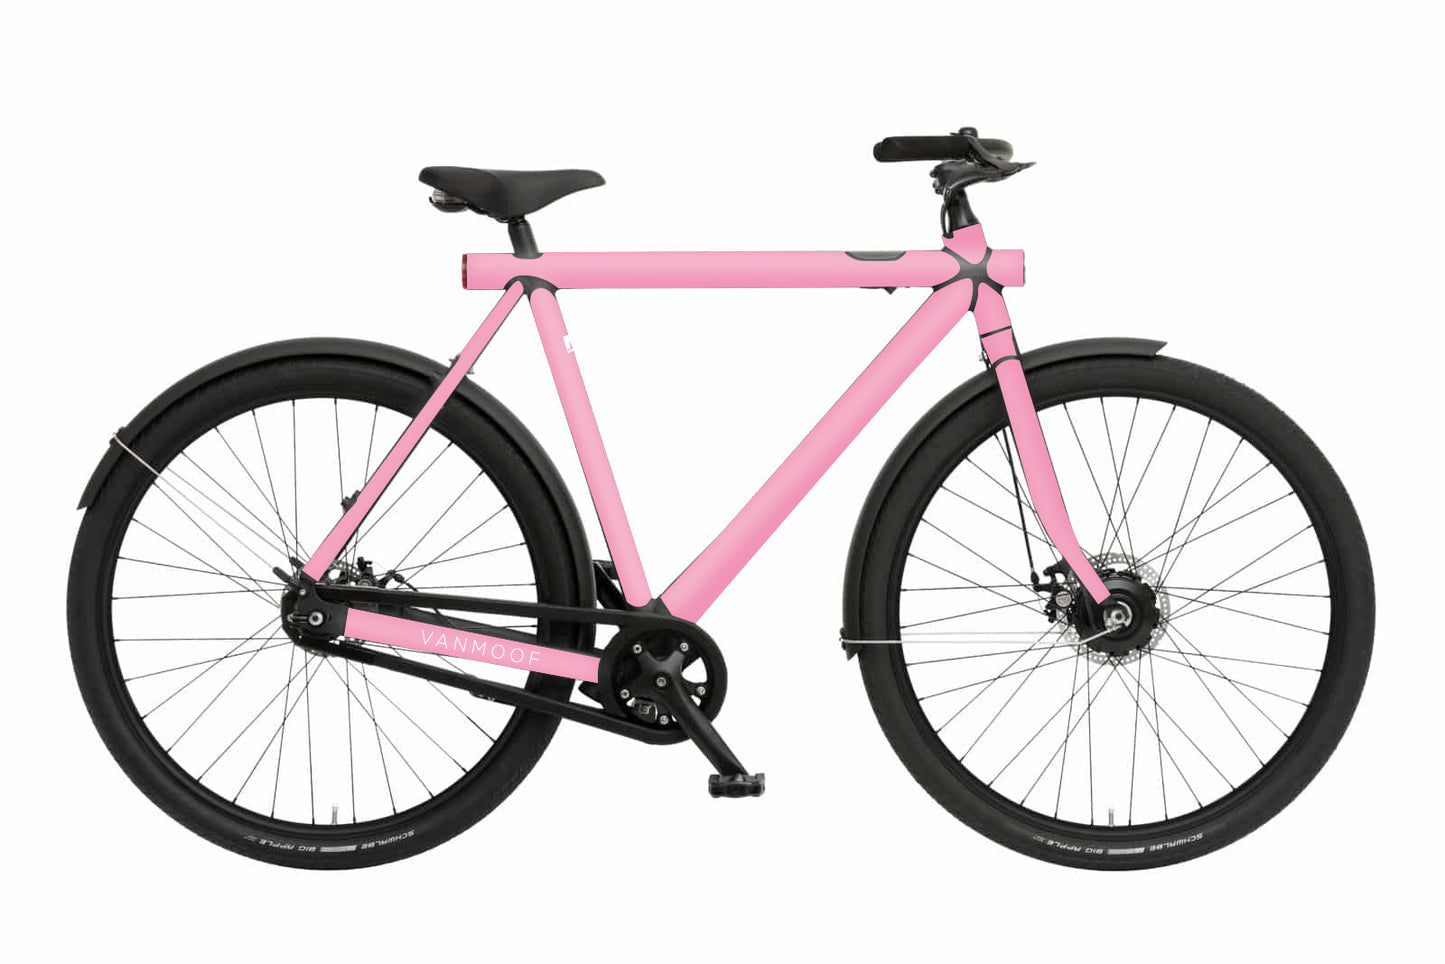 PINK PROTECT KIT FOR VANMOOF S ELECTRIFIED